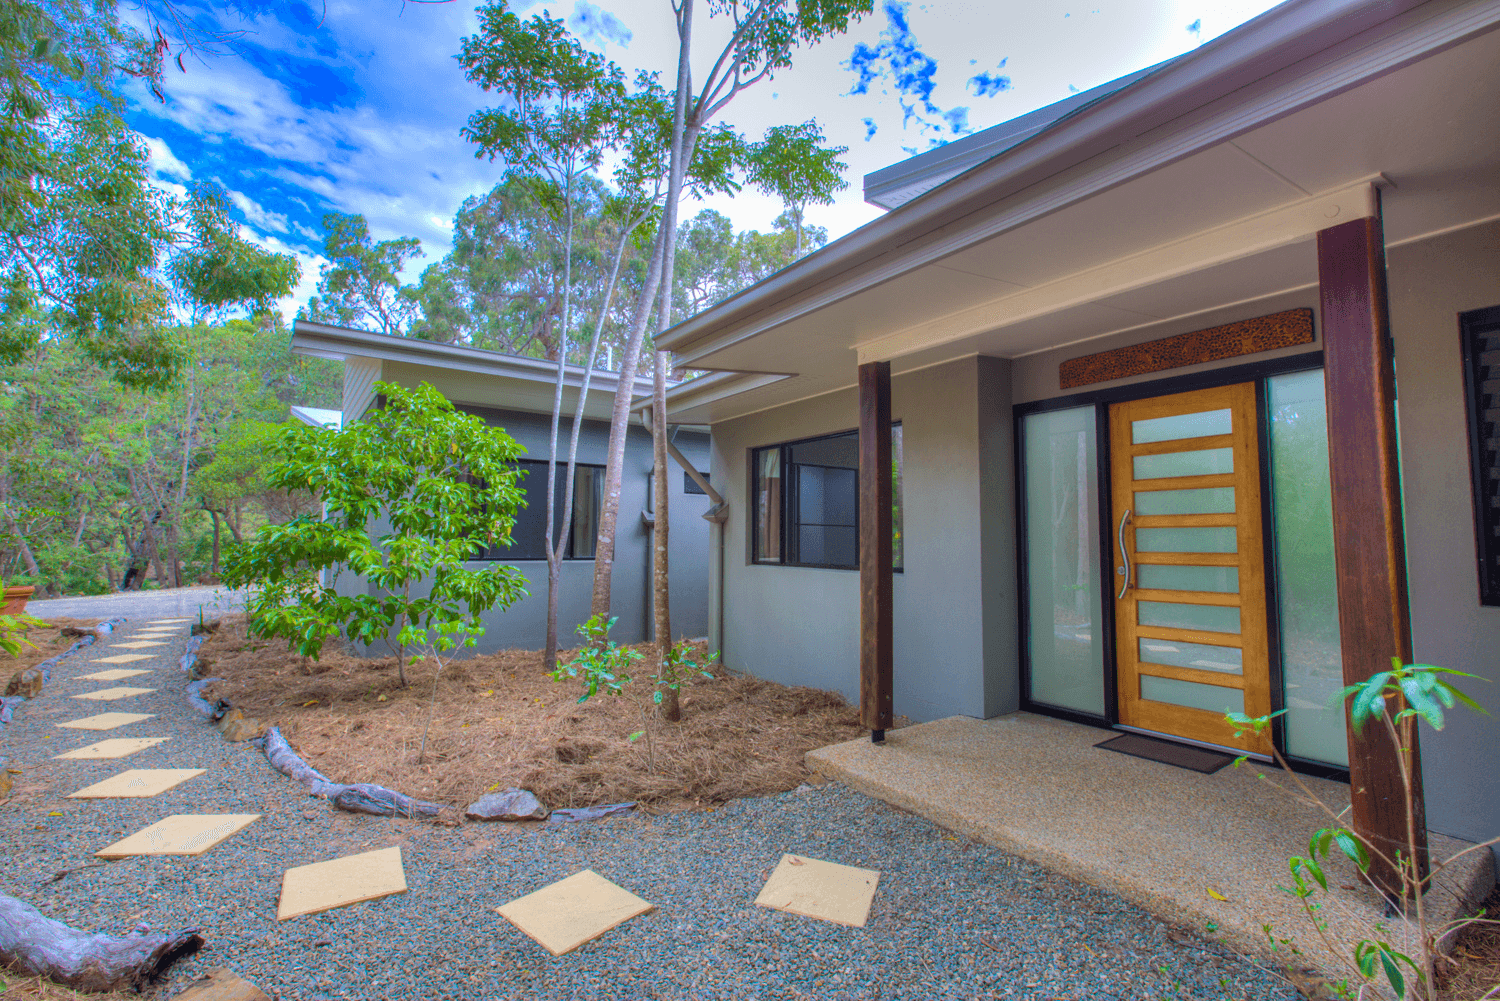 29/552 Bloodwood Nth, AGNES WATER, QLD 4677